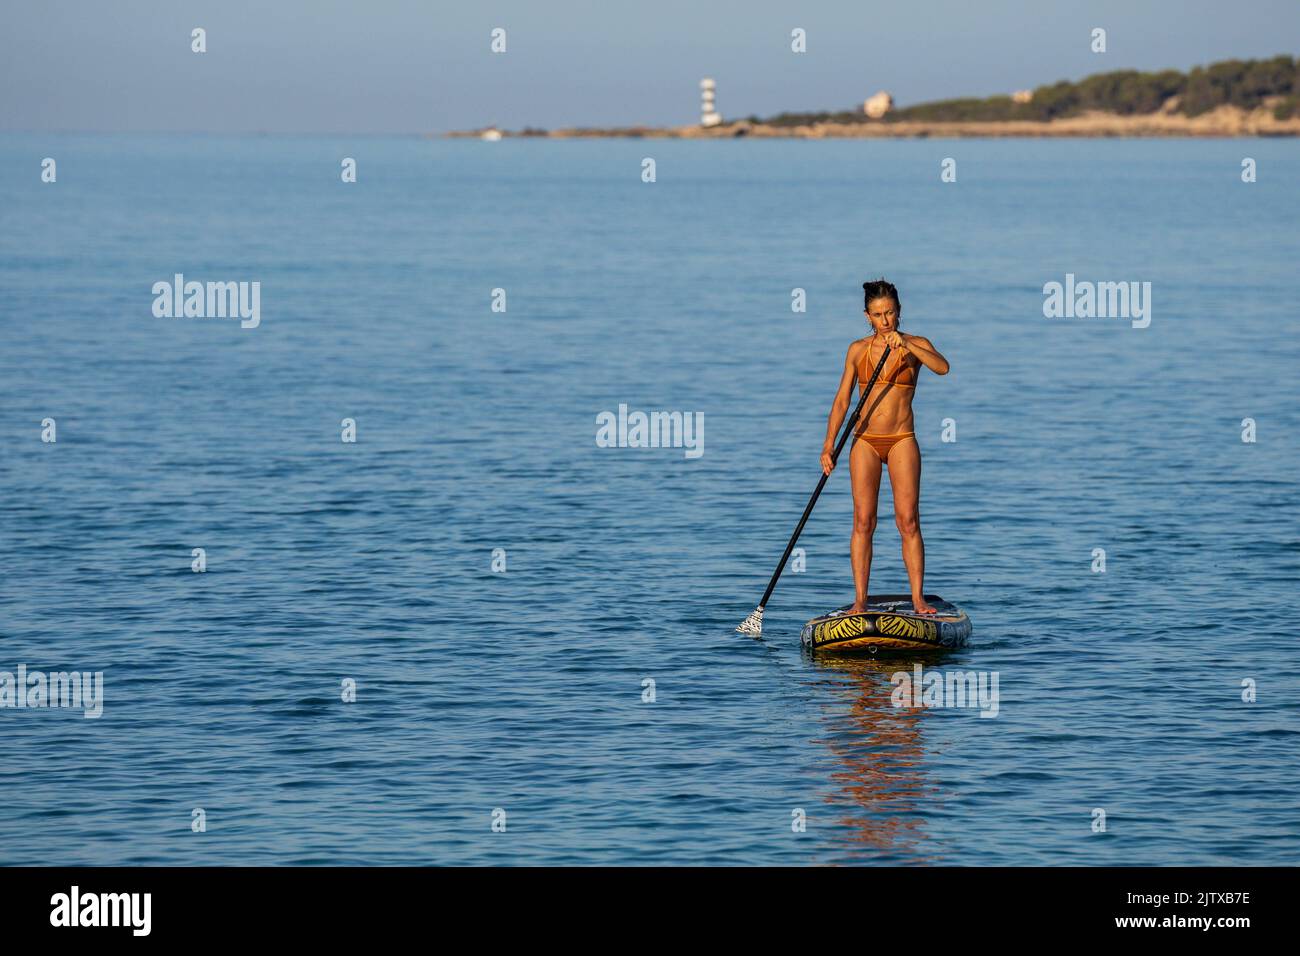 lonely woman practicing paddle surfing in the Mediterranean, Sa Rapita, Campos, Mallorca, Balearic Islands, Spain. Stock Photo